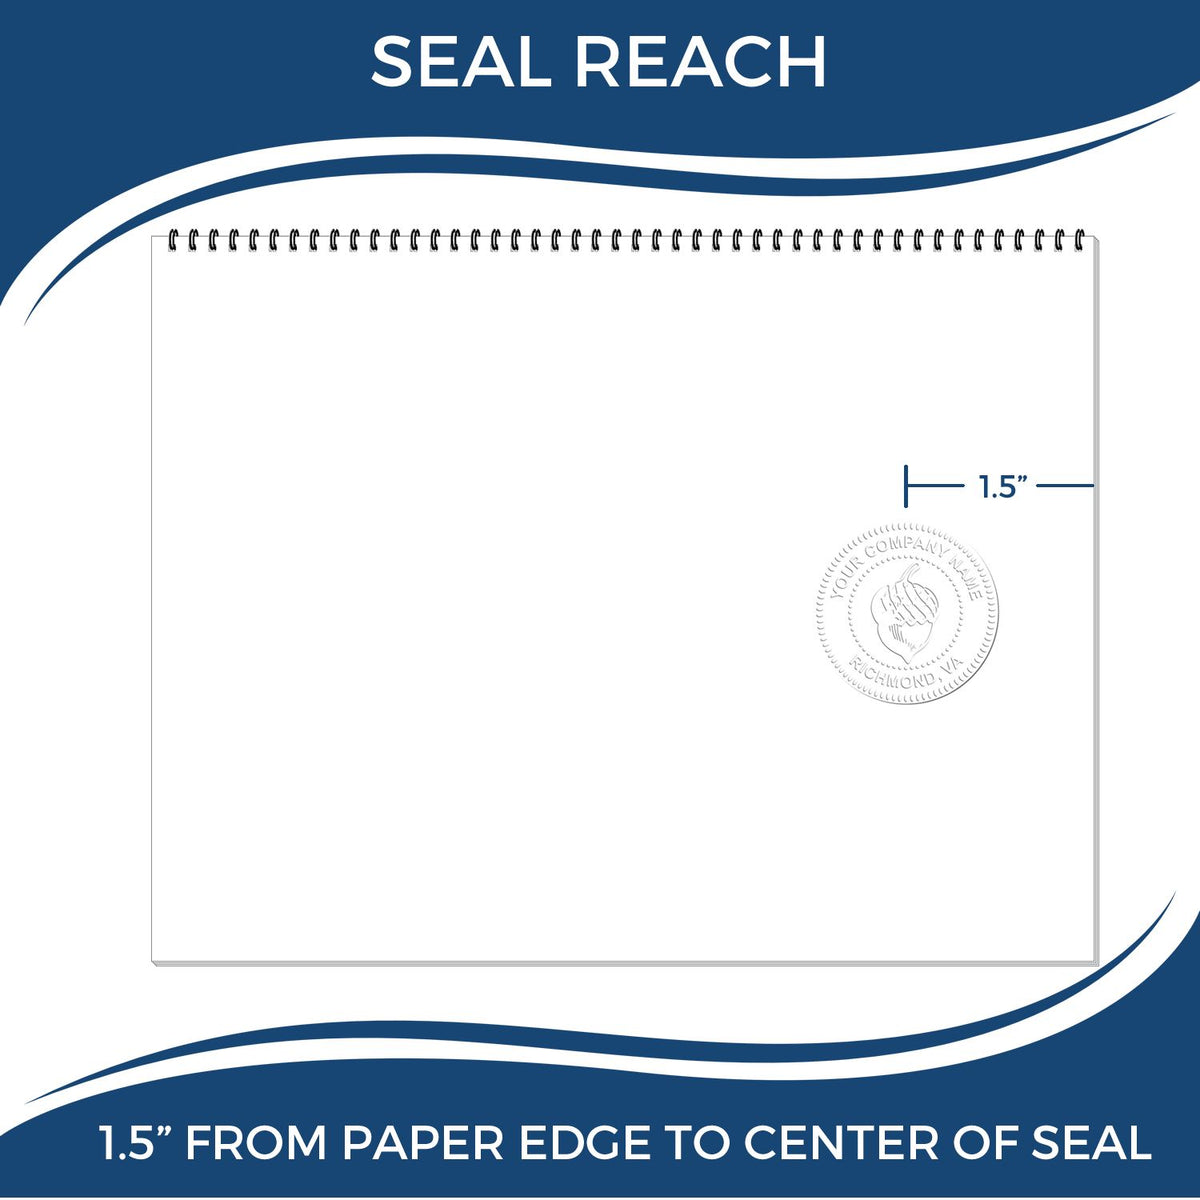 An infographic showing the seal reach which is represented by a ruler and a miniature seal image of the Hybrid Utah Engineer Seal